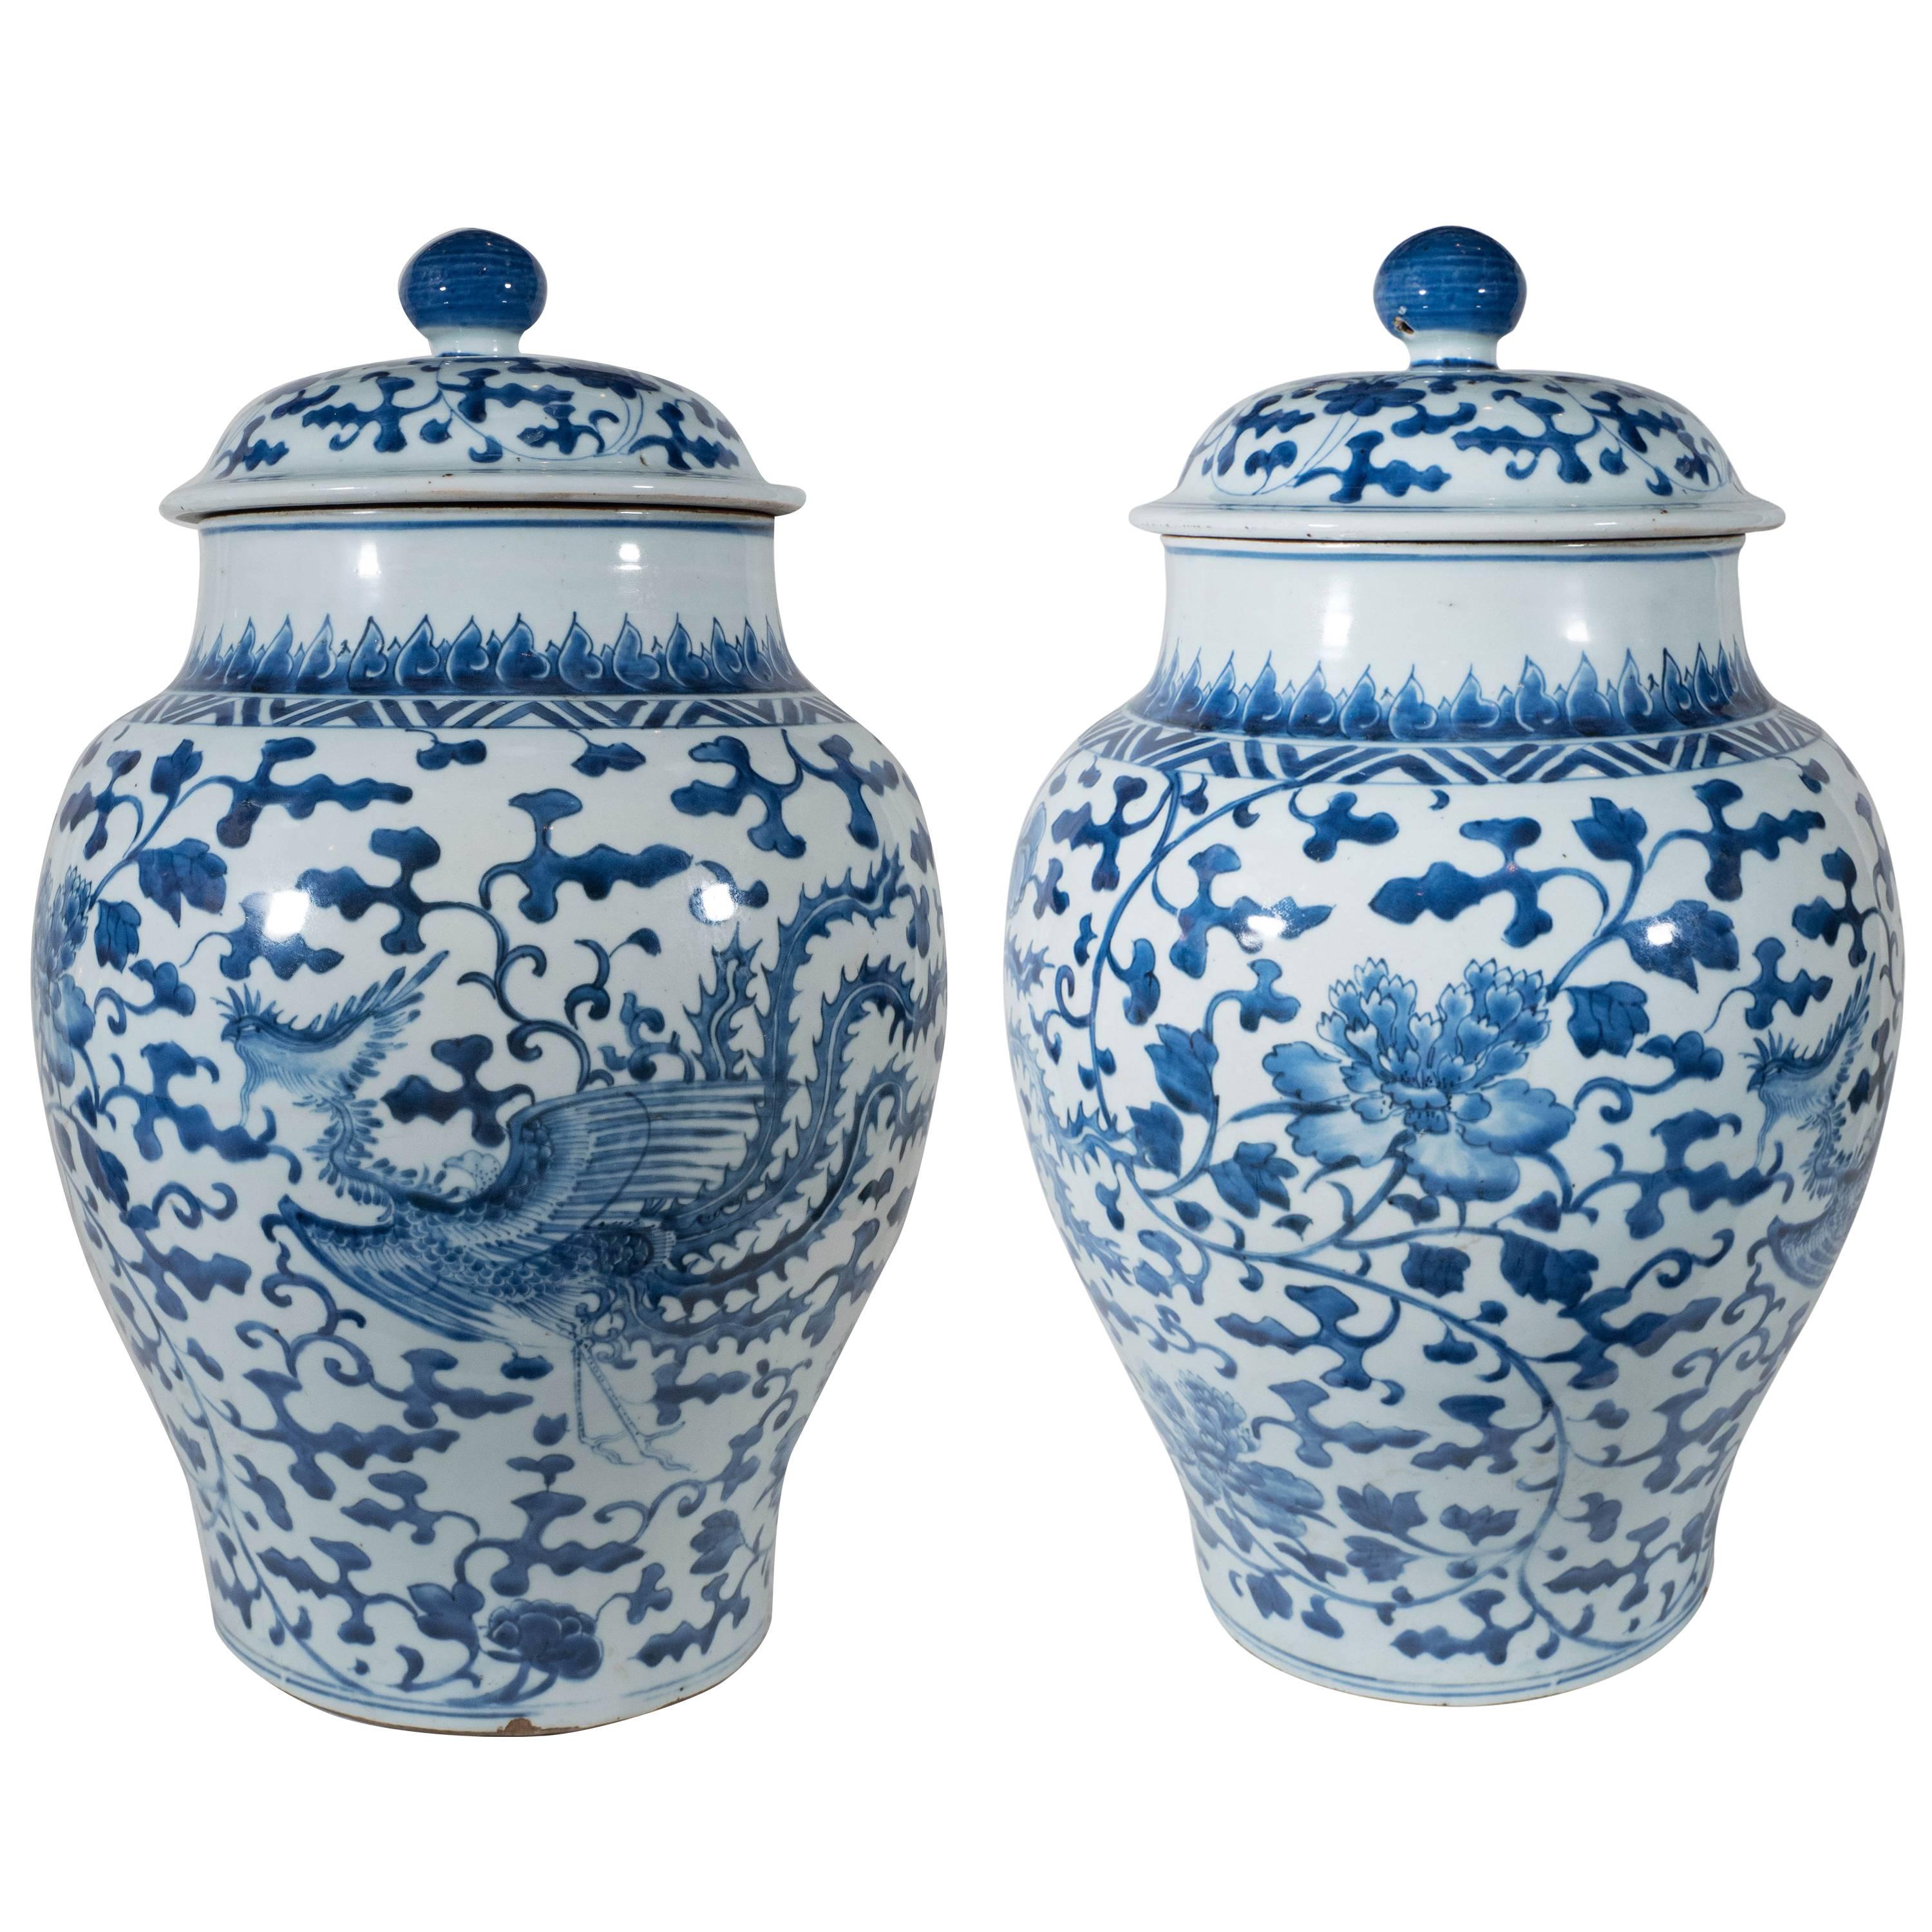 Antique Blue and White Chinese Porcelain Ginger Jars